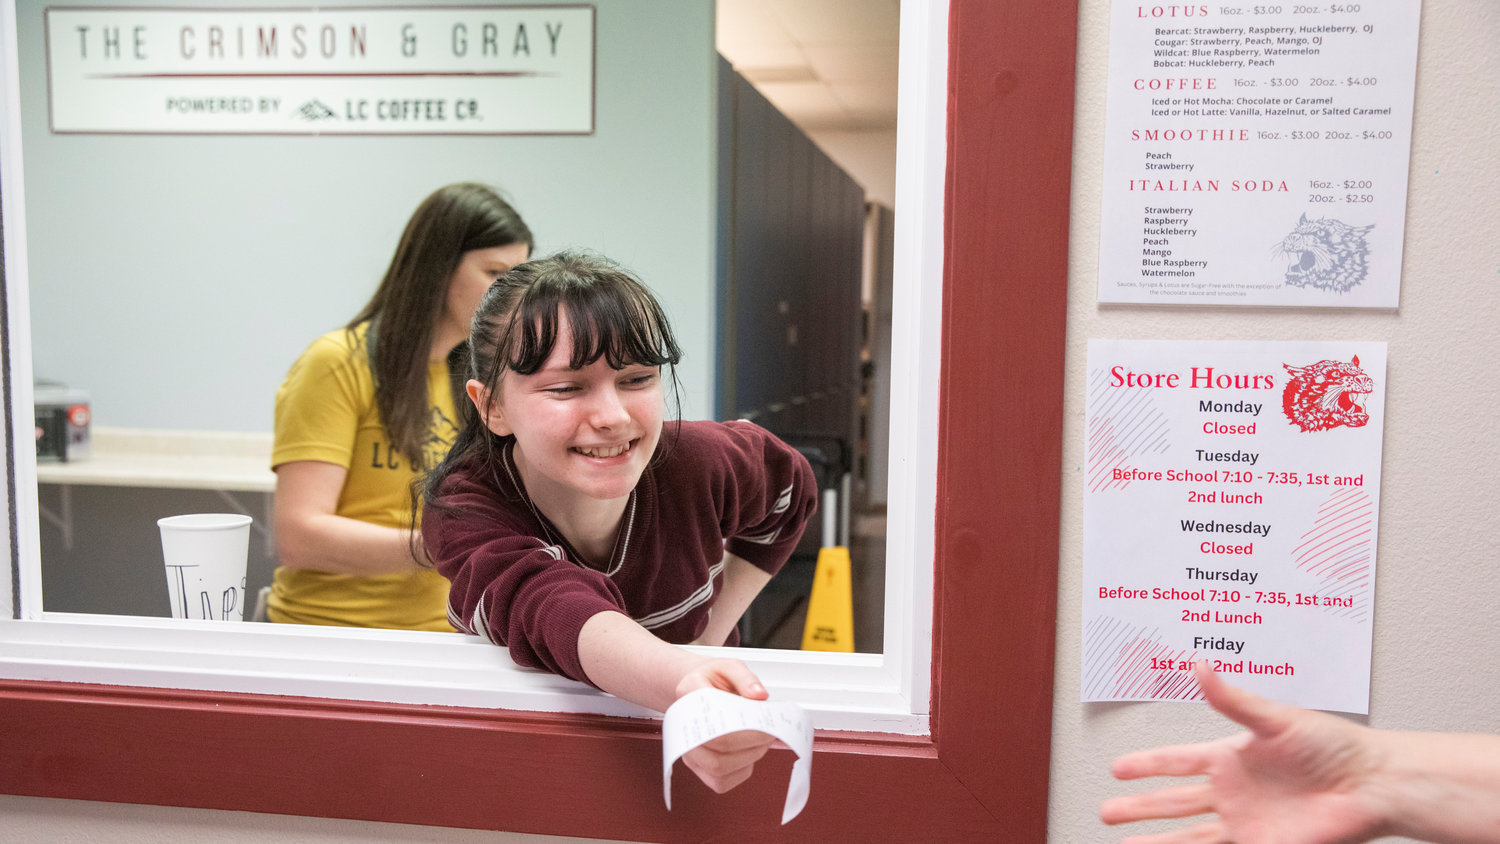 Receipts are handed out with smiles at W.F. West High School during a ribbon cutting ceremony on Wednesday for a new student store "The Crimson & Gray," powered by Lewis County Coffee Co. in Chehalis.